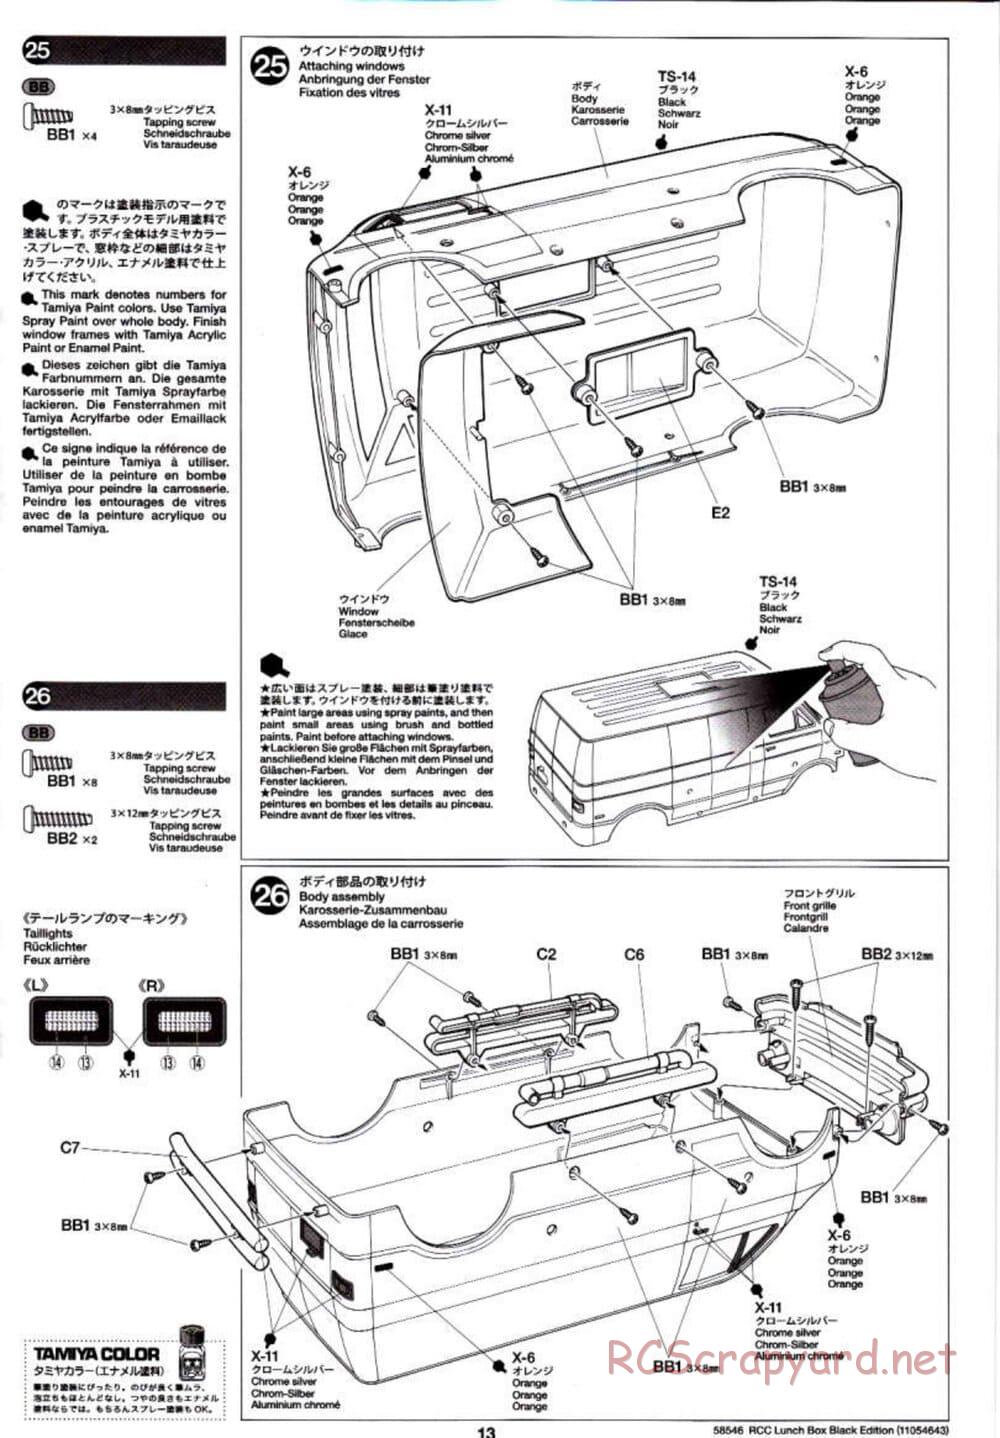 Tamiya - Lunch Box - Black Edition - CW-01 Chassis - Manual - Page 13